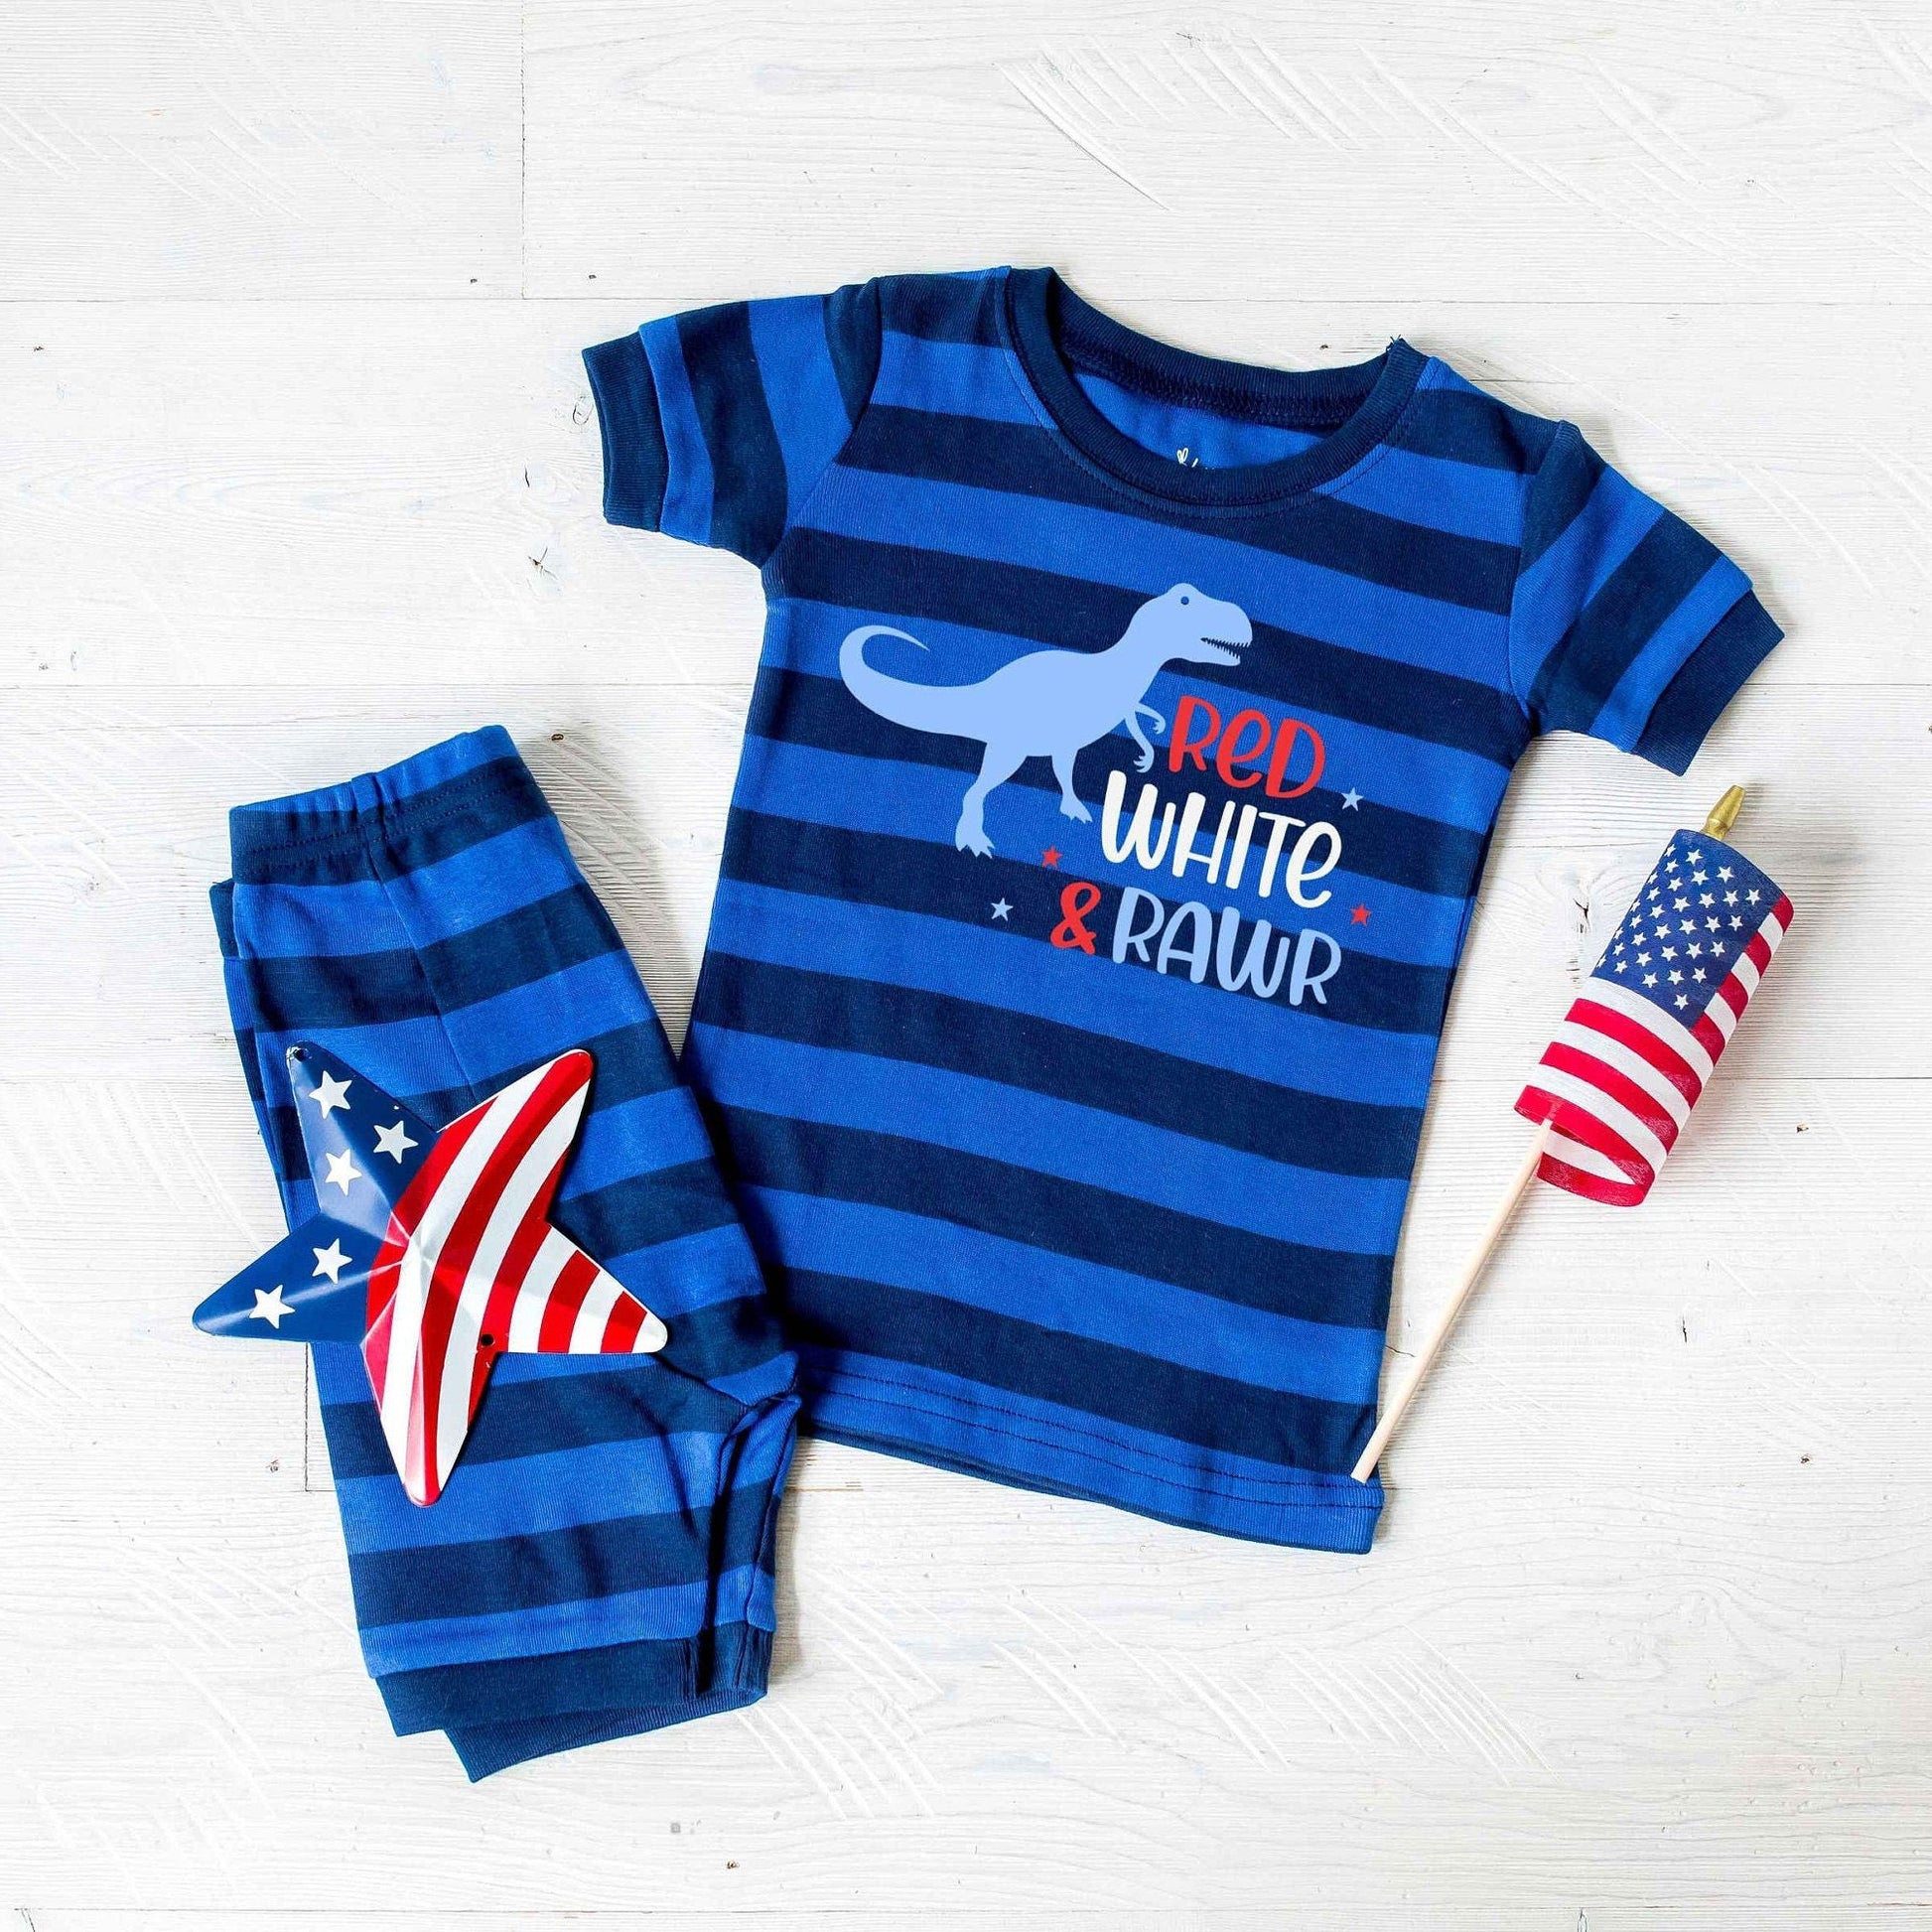 Red White and Rawr 4th of July Blue Striped Shorts Toddler and Kids Pajamas - Kids 4th of July Pajamas - 4th of July Toddler Pajamas Set